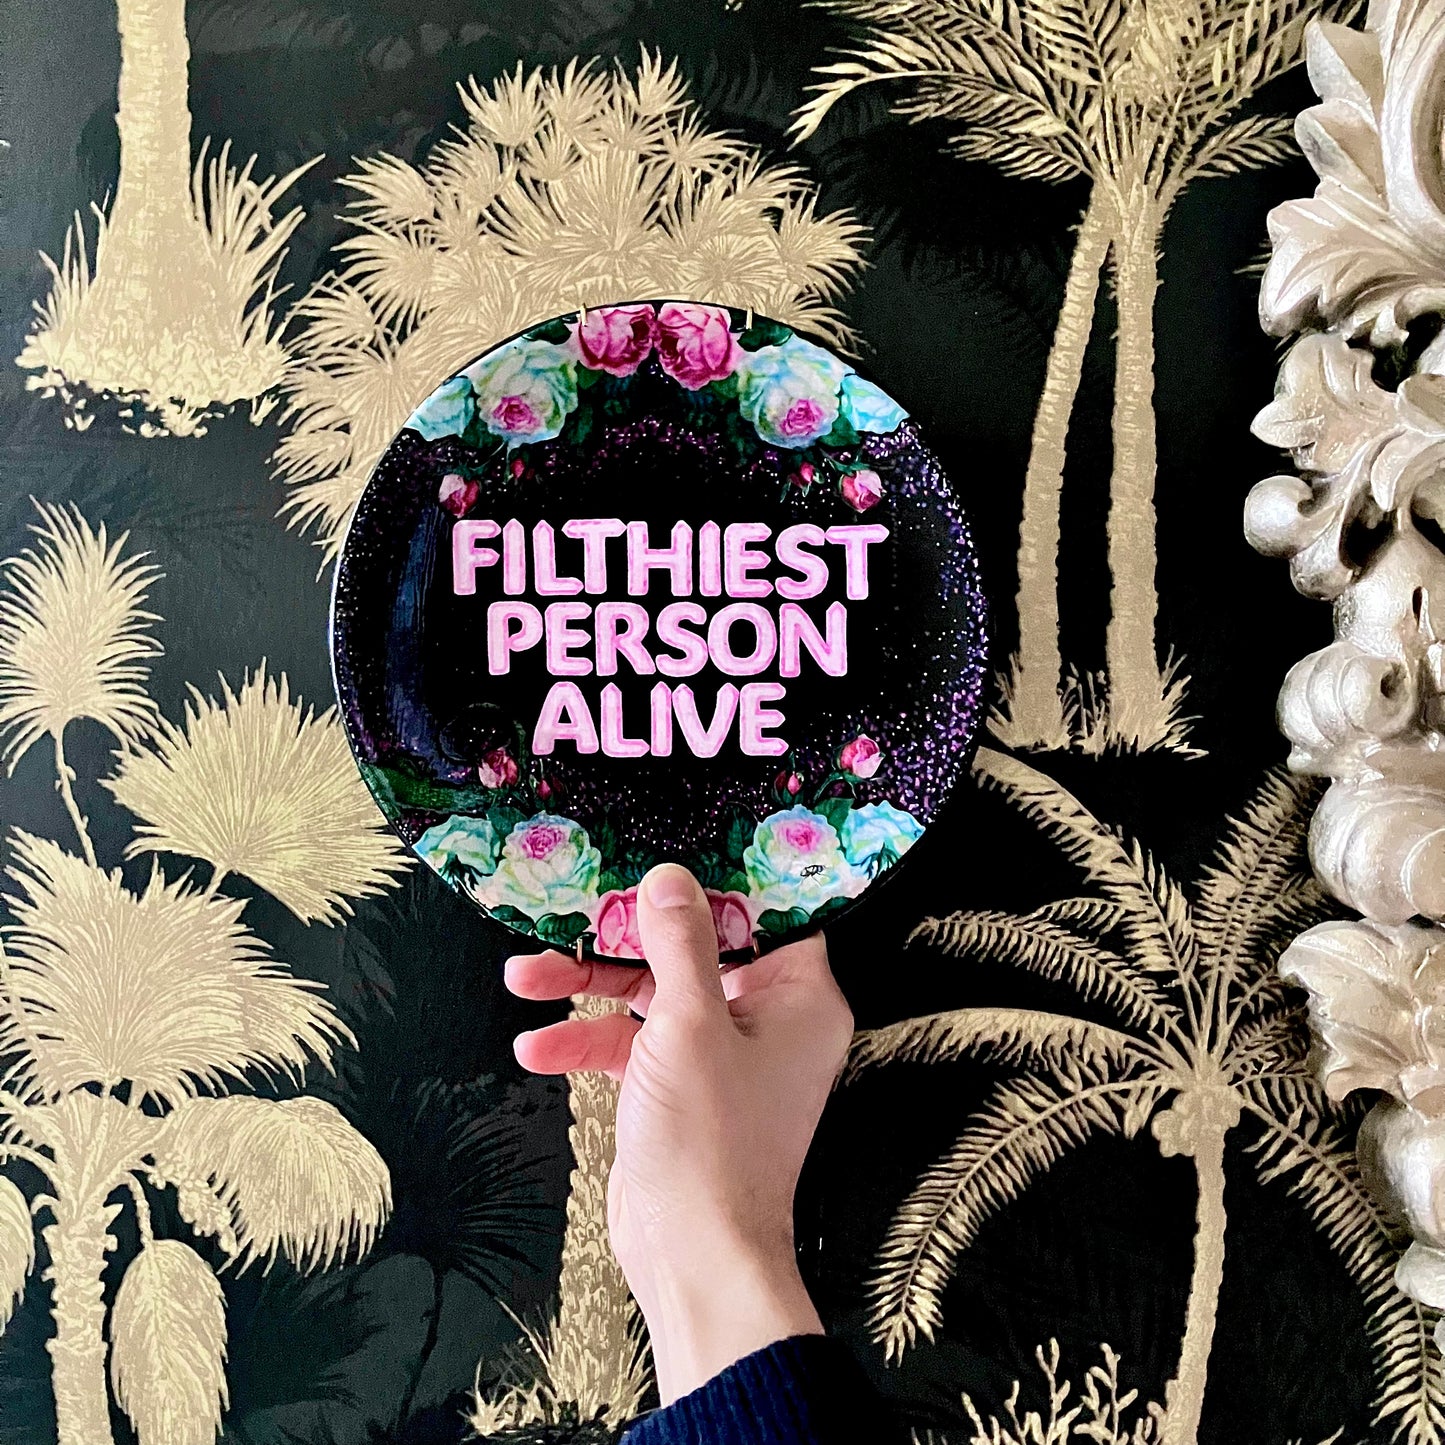 Black Upcycled Wall Plate - "Filthiest Person Alive" - by House of Frisson